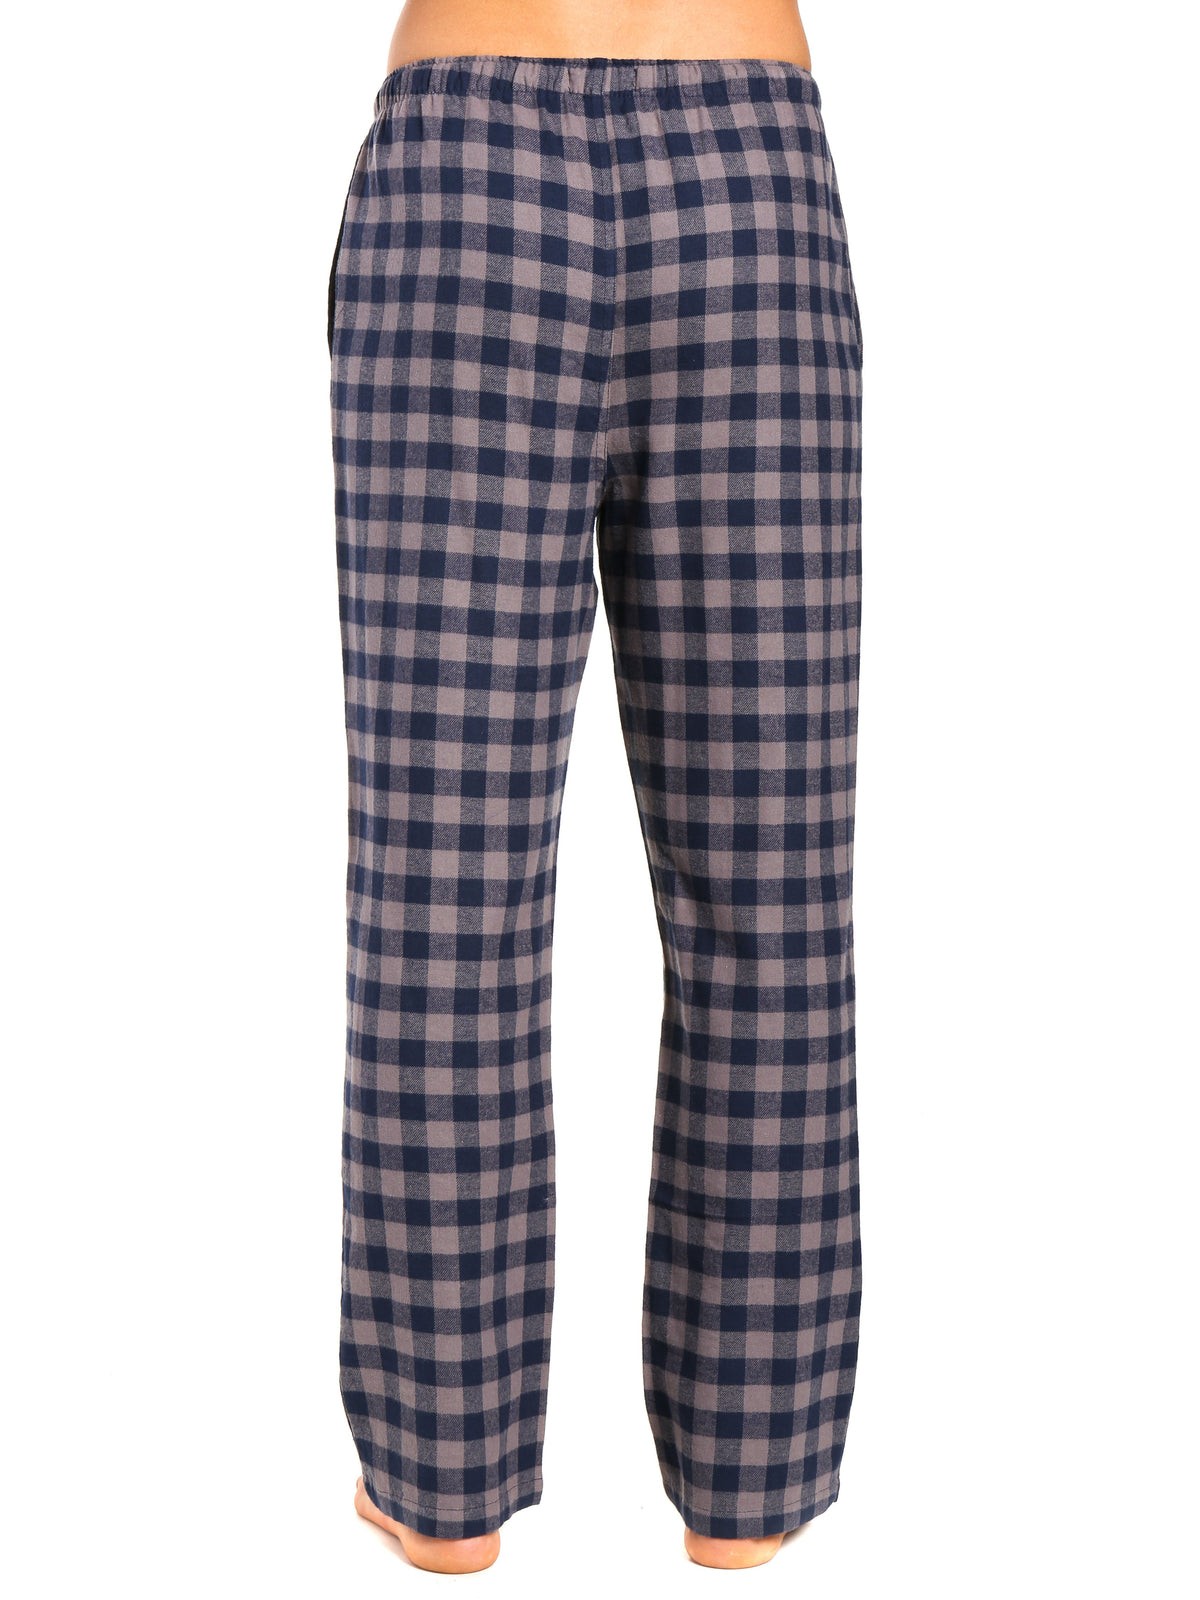 Gingham Charcoal-Navy